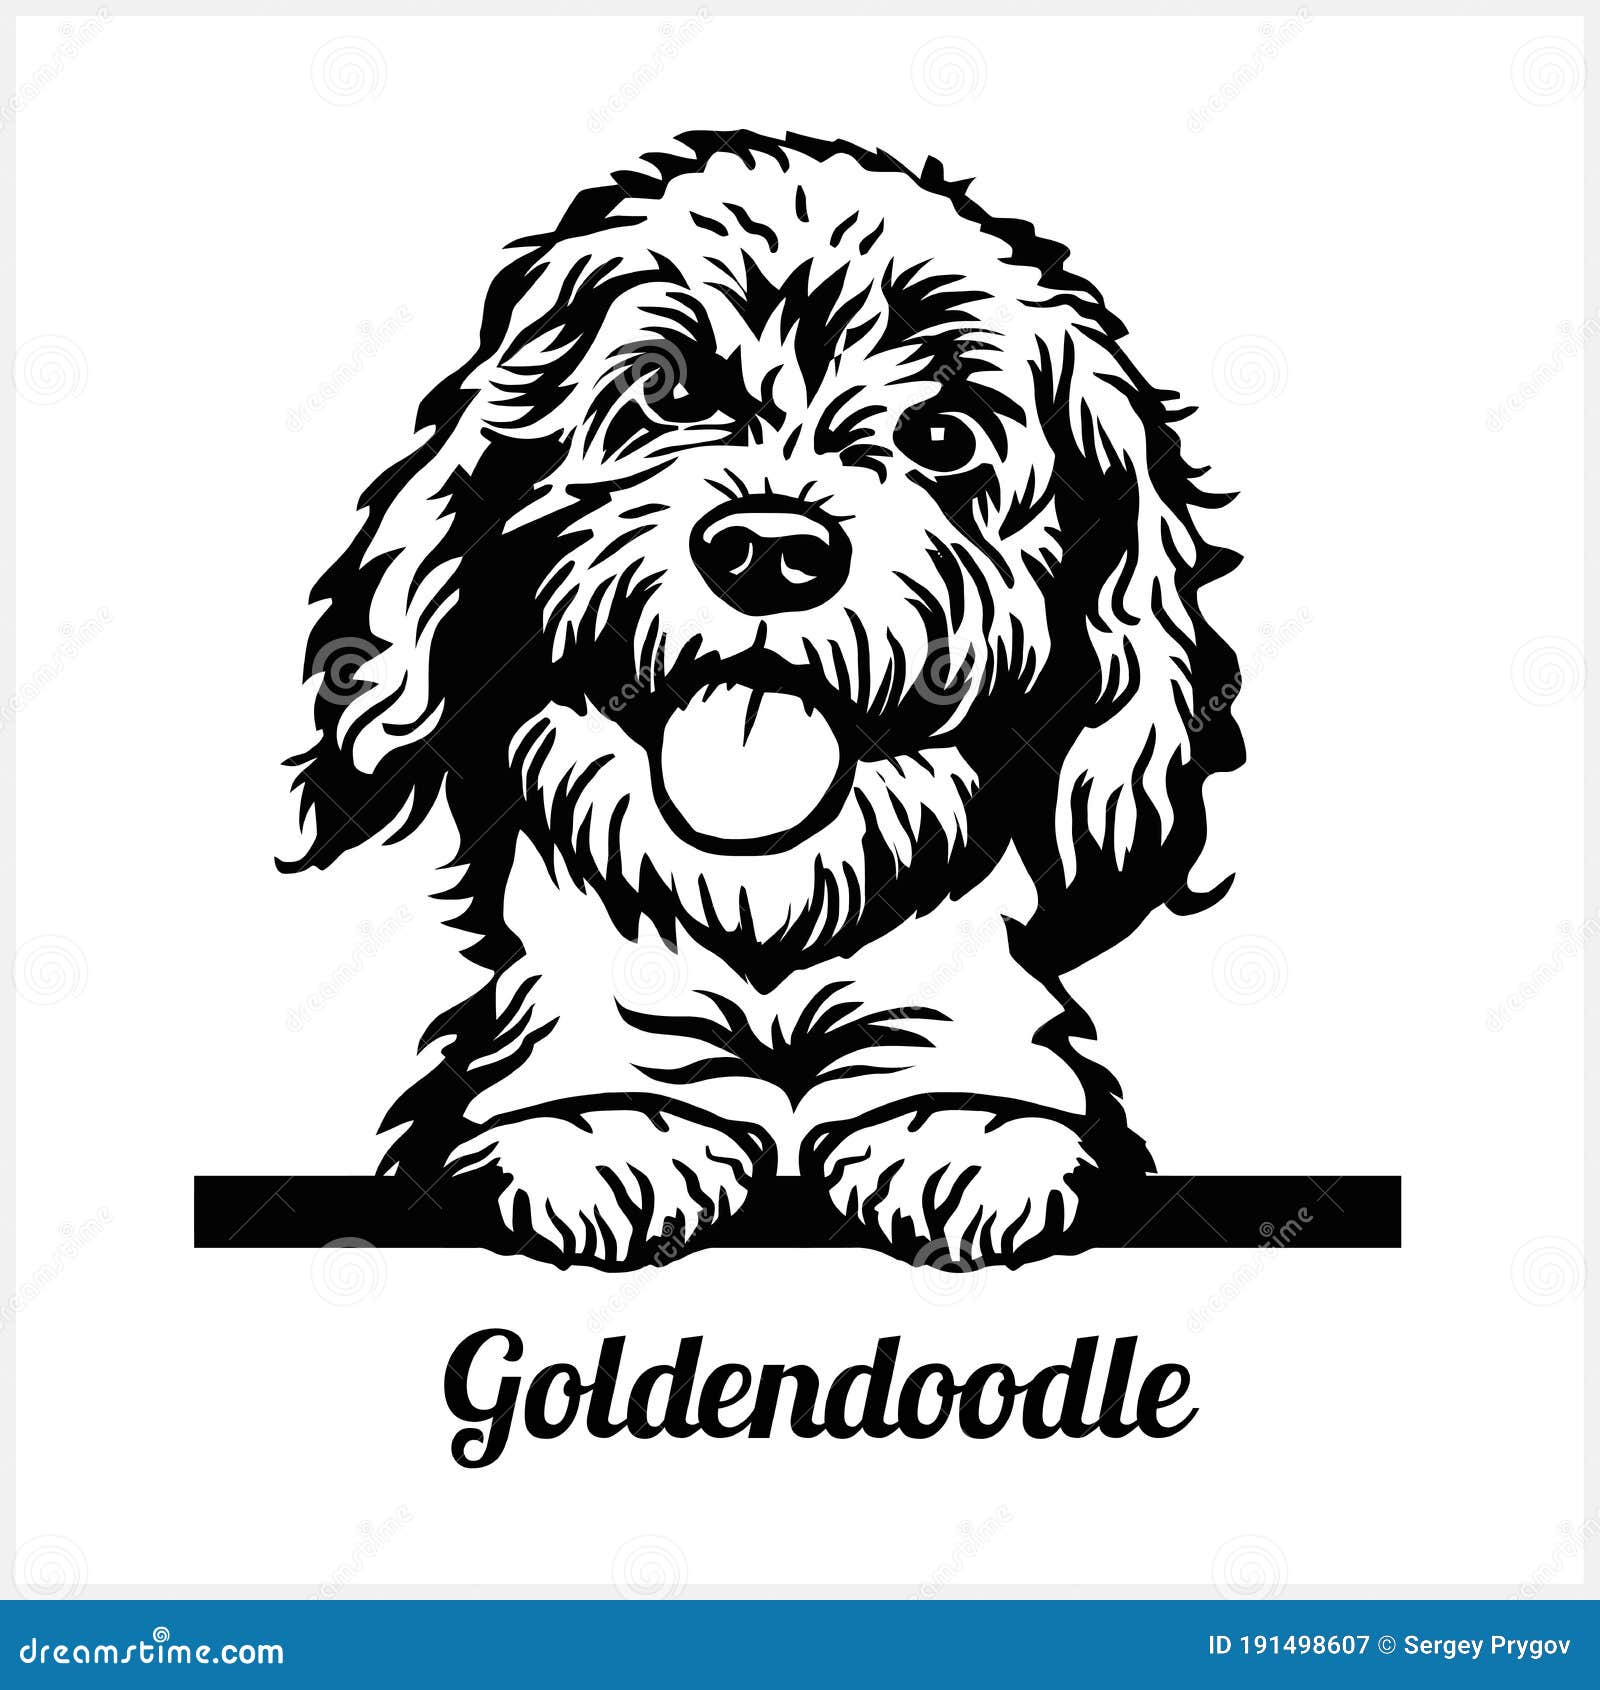 Goldendoodle Cartoons, Illustrations & Vector Stock Images - 231